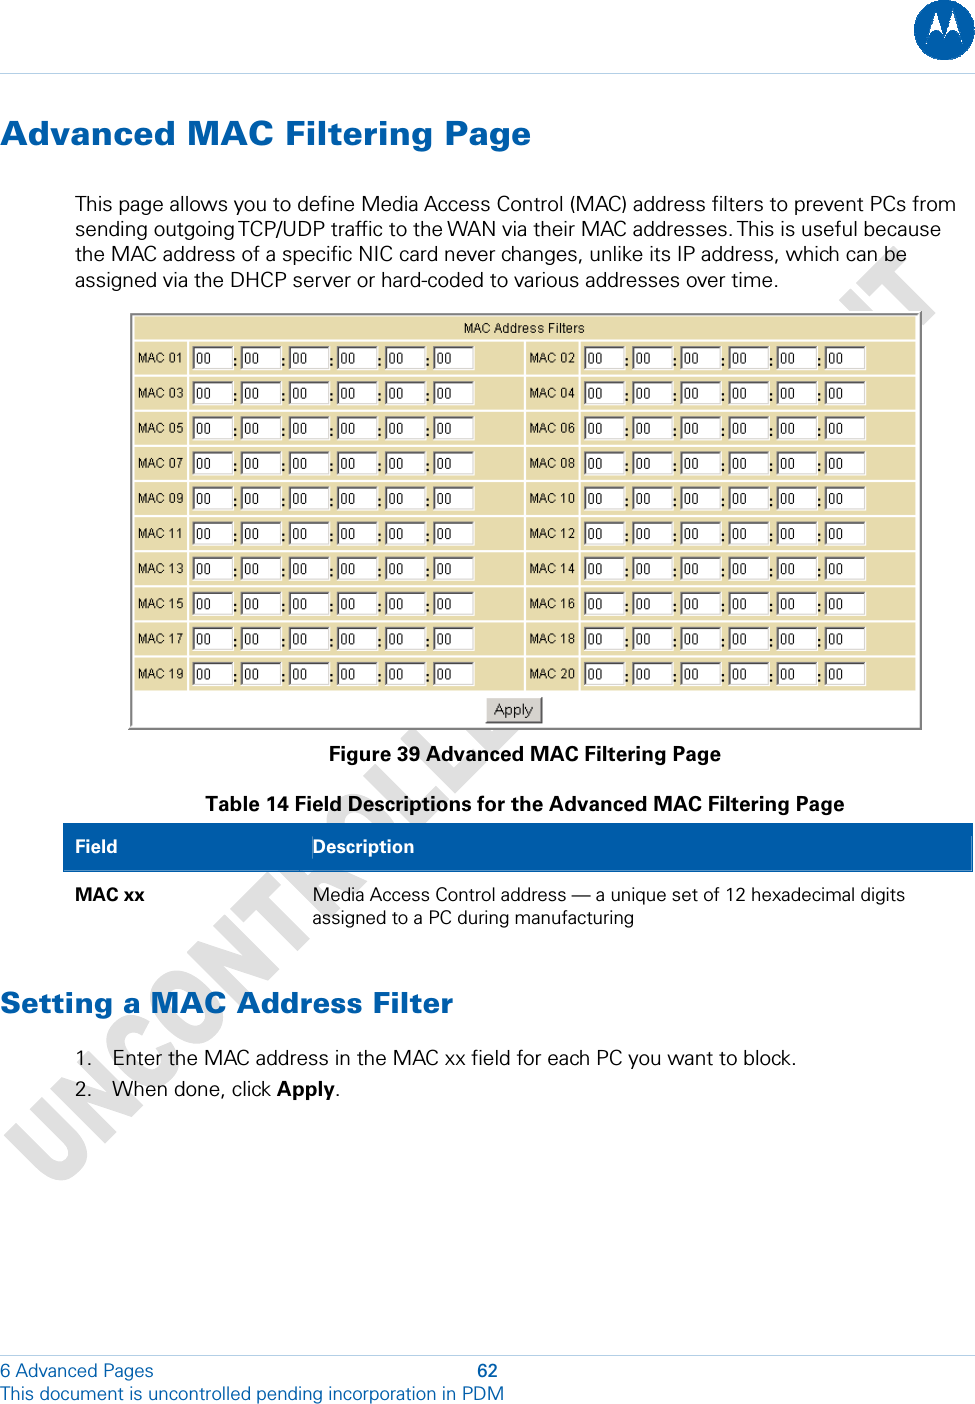  Advanced MAC Filtering Page This page allows you to define Media Access Control (MAC) address filters to prevent PCs from sending outgoing TCP/UDP traffic to the WAN via their MAC addresses. This is useful because the MAC address of a specific NIC card never changes, unlike its IP address, which can be assigned via the DHCP server or hard-coded to various addresses over time.  Figure 39 Advanced MAC Filtering Page Table 14 Field Descriptions for the Advanced MAC Filtering Page Field  Description MAC xx  Media Access Control address — a unique set of 12 hexadecimal digits assigned to a PC during manufacturing Setting a MAC Address Filter 1. Enter the MAC address in the MAC xx field for each PC you want to block. 2. When done, click Apply. 6 Advanced Pages  62 This document is uncontrolled pending incorporation in PDM  